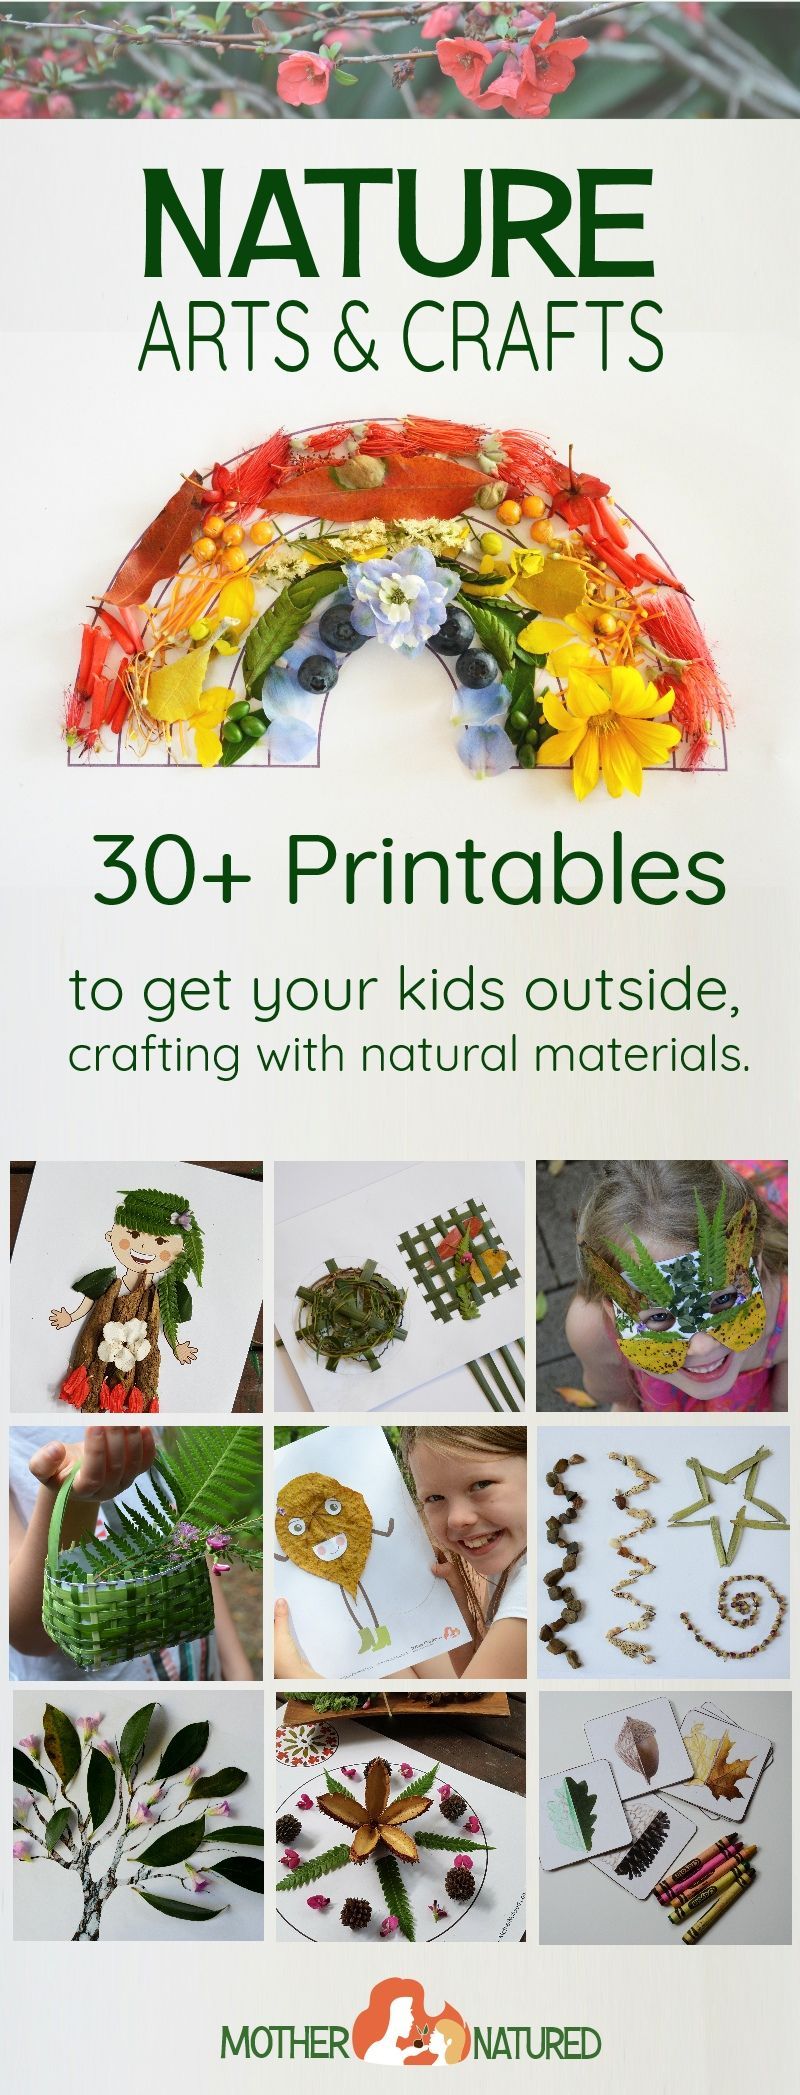 Nature Arts and Crafts printables to get your kids outside and manipulating natural materials. Just add nature!